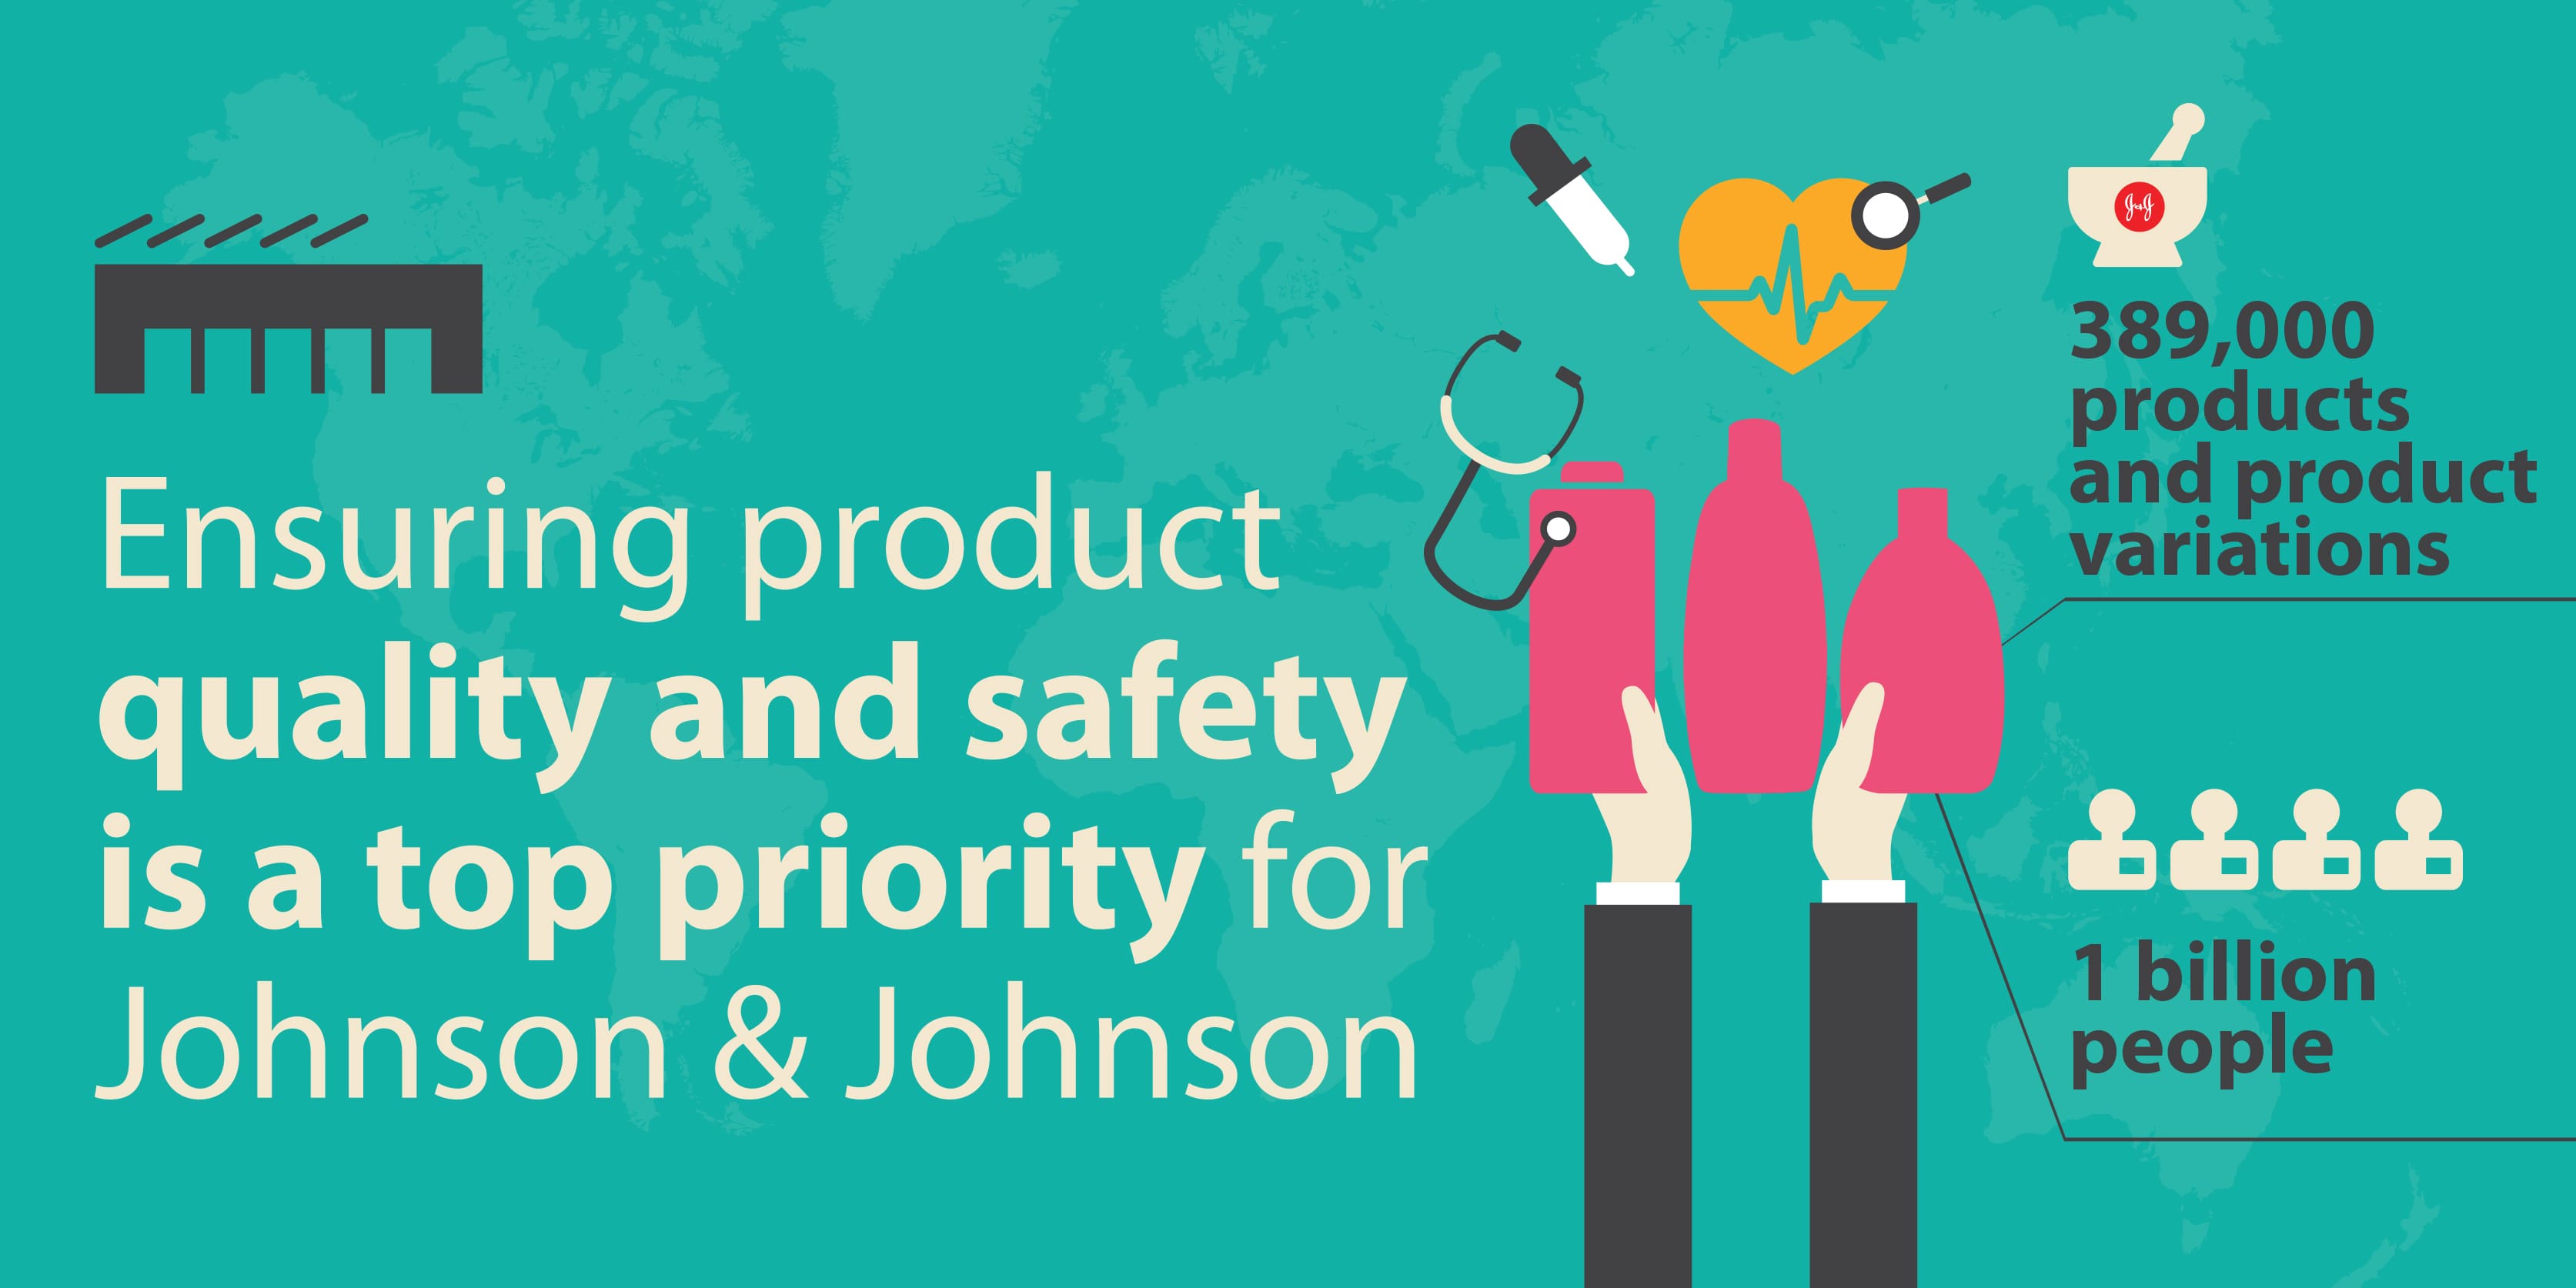 How Johnson & Johnson is ensuring product quality and safety